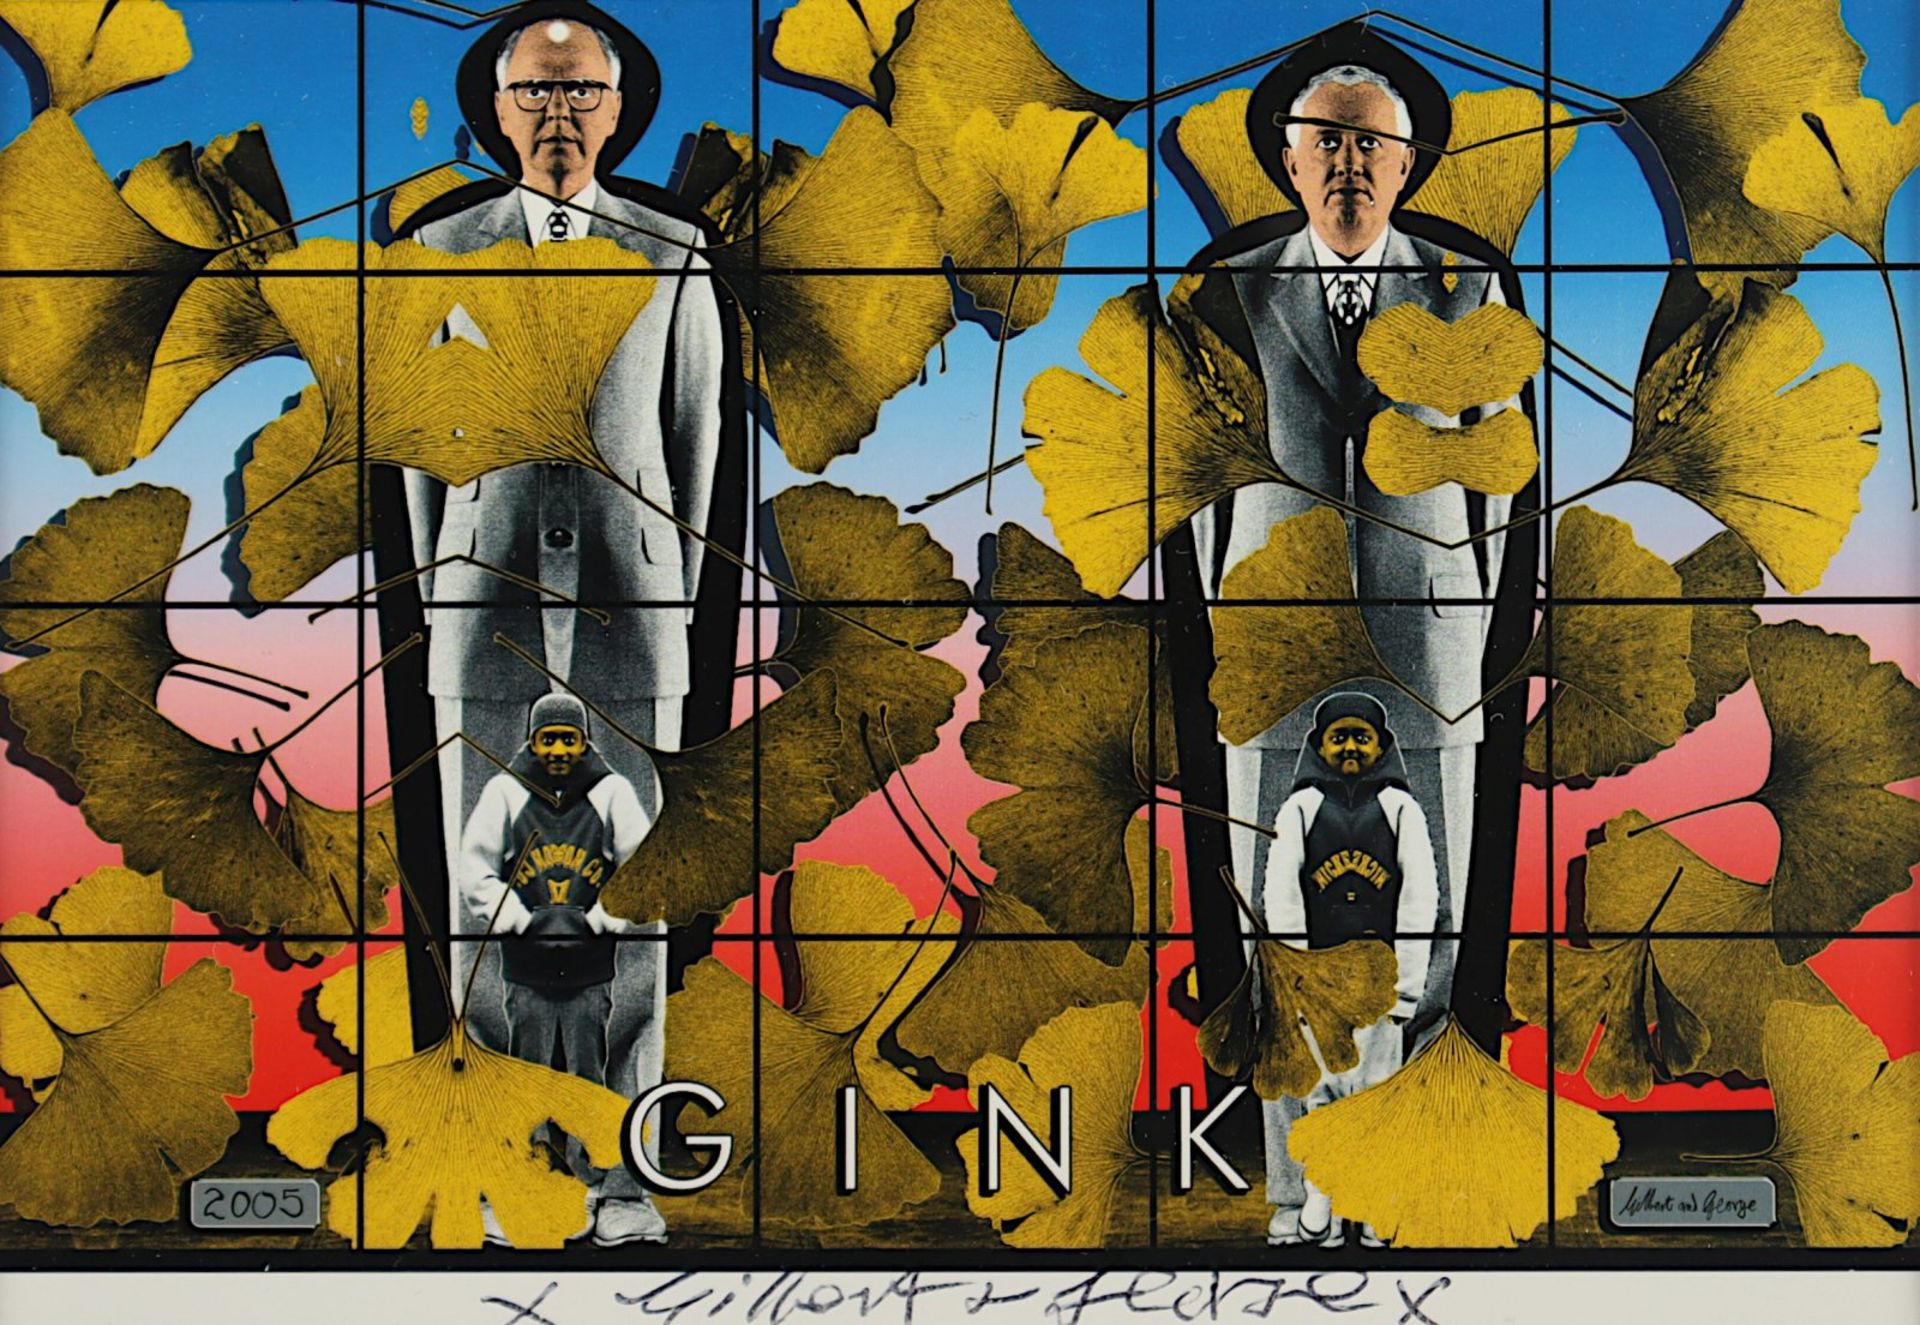 GILBERT & GEORGE, "Grinko Pictures",